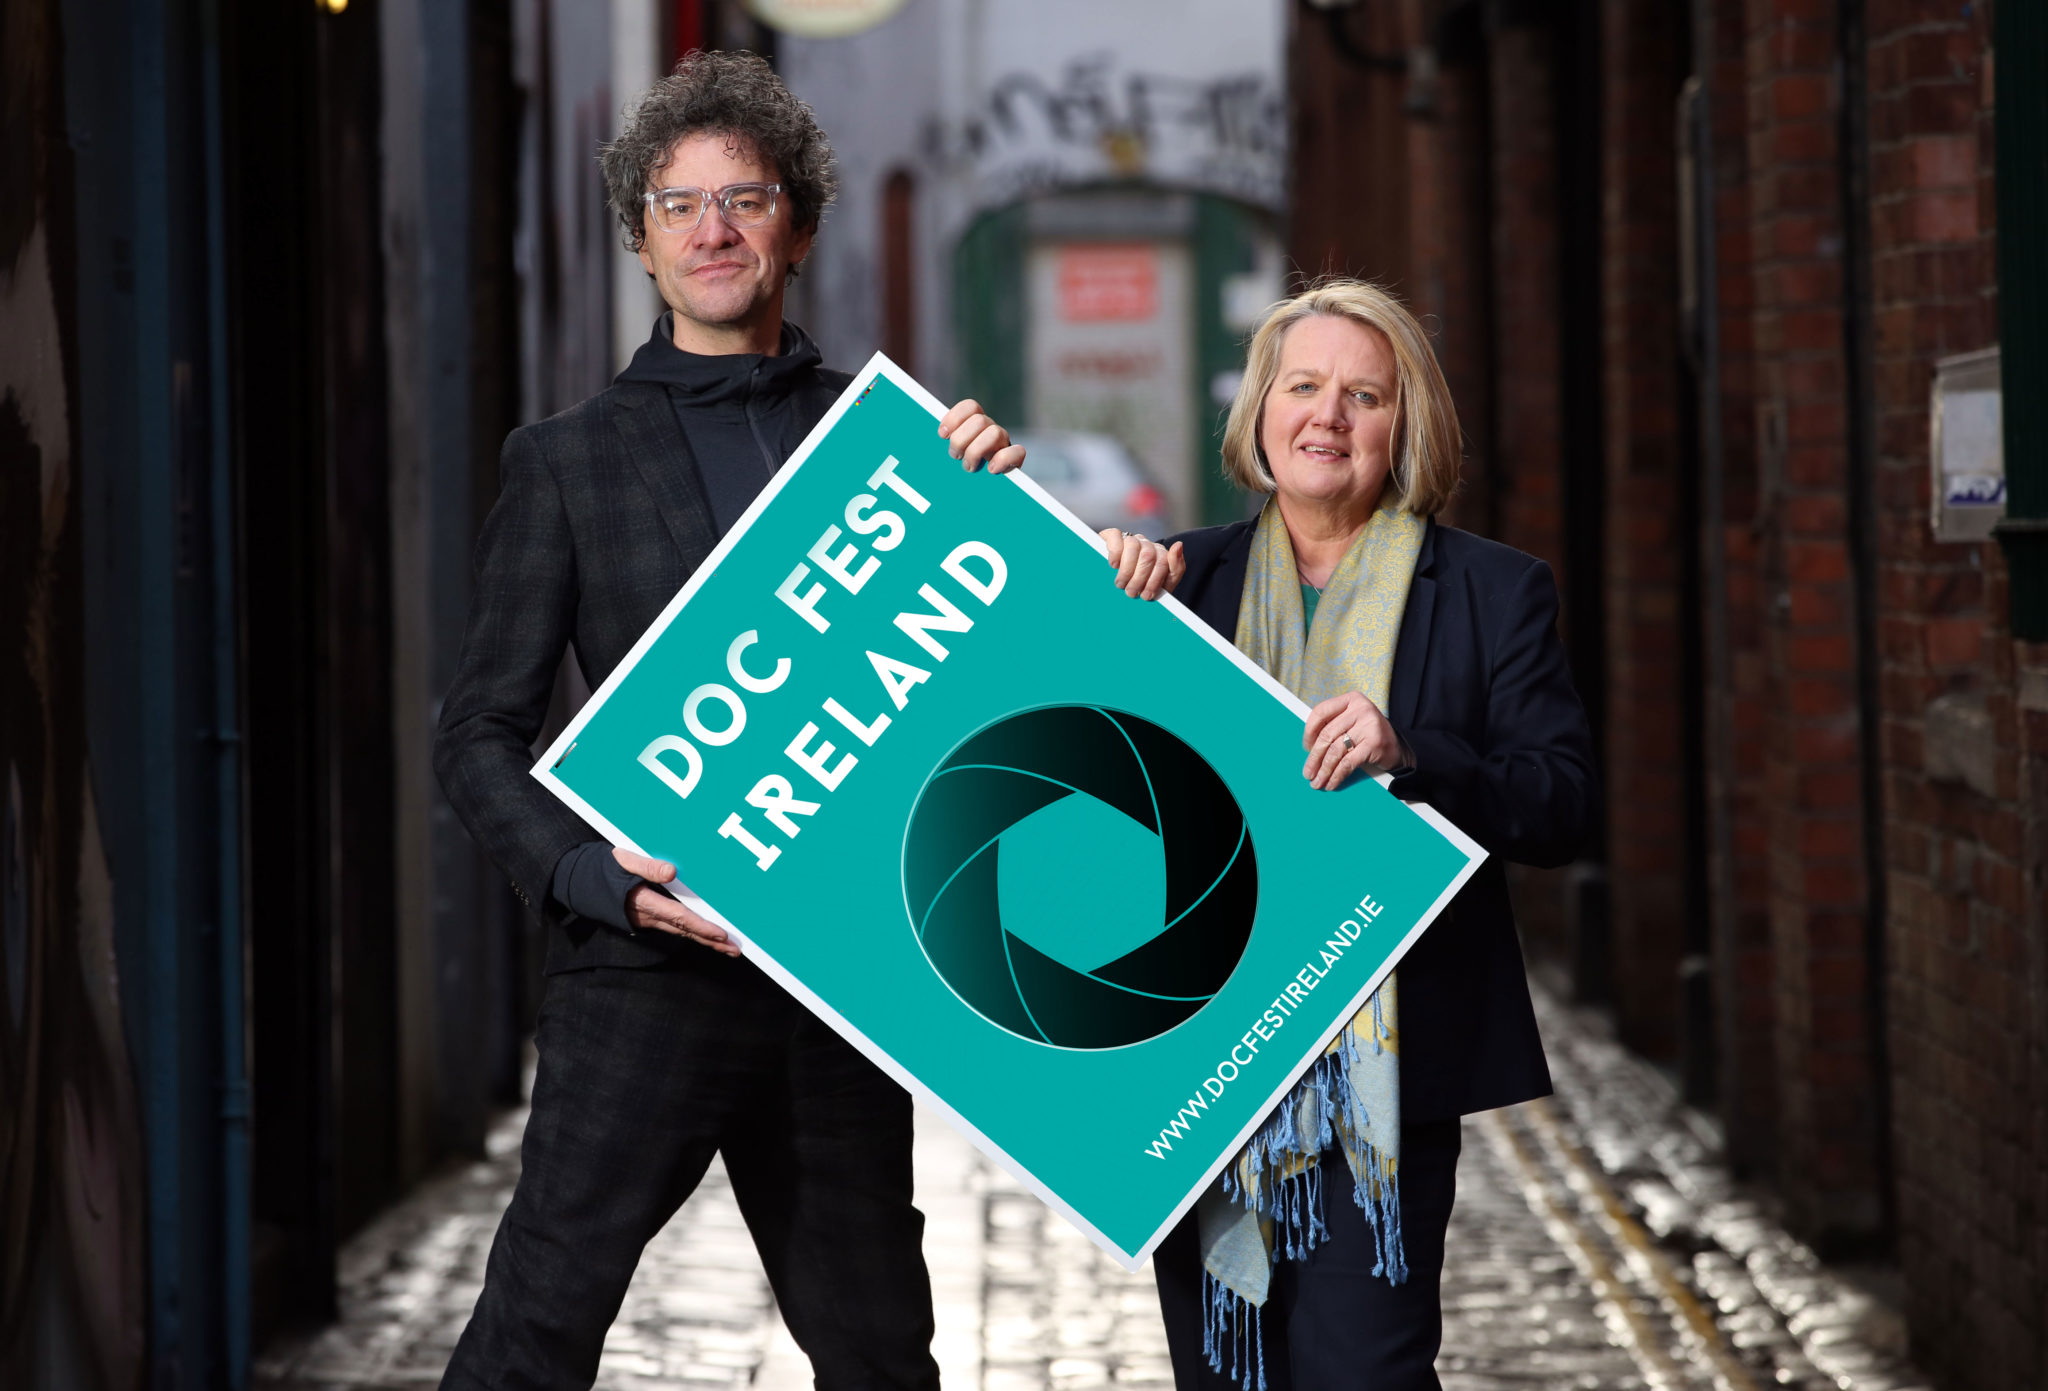 Chair of Belfast Film Festival Mark Cousins, and Director Michele Devlin launch Doc Fest Ireland, an exciting new documentary film festival.